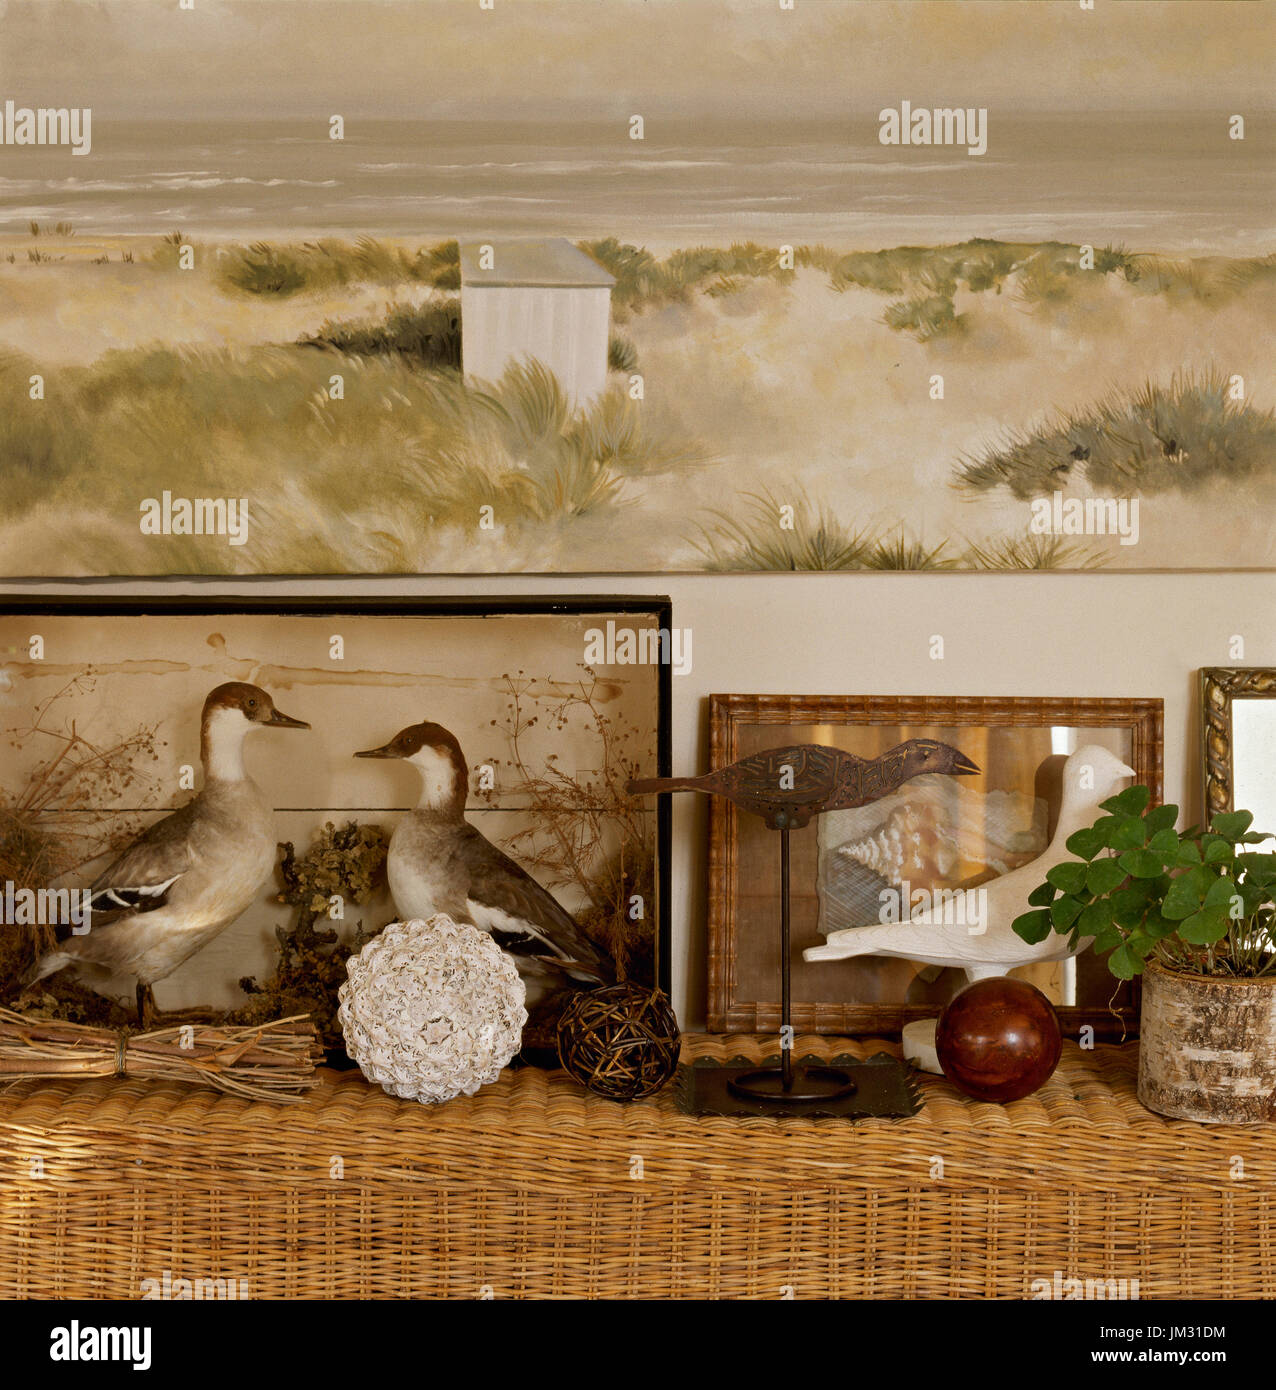 Bird and nature themed decorating ideas Stock Photo